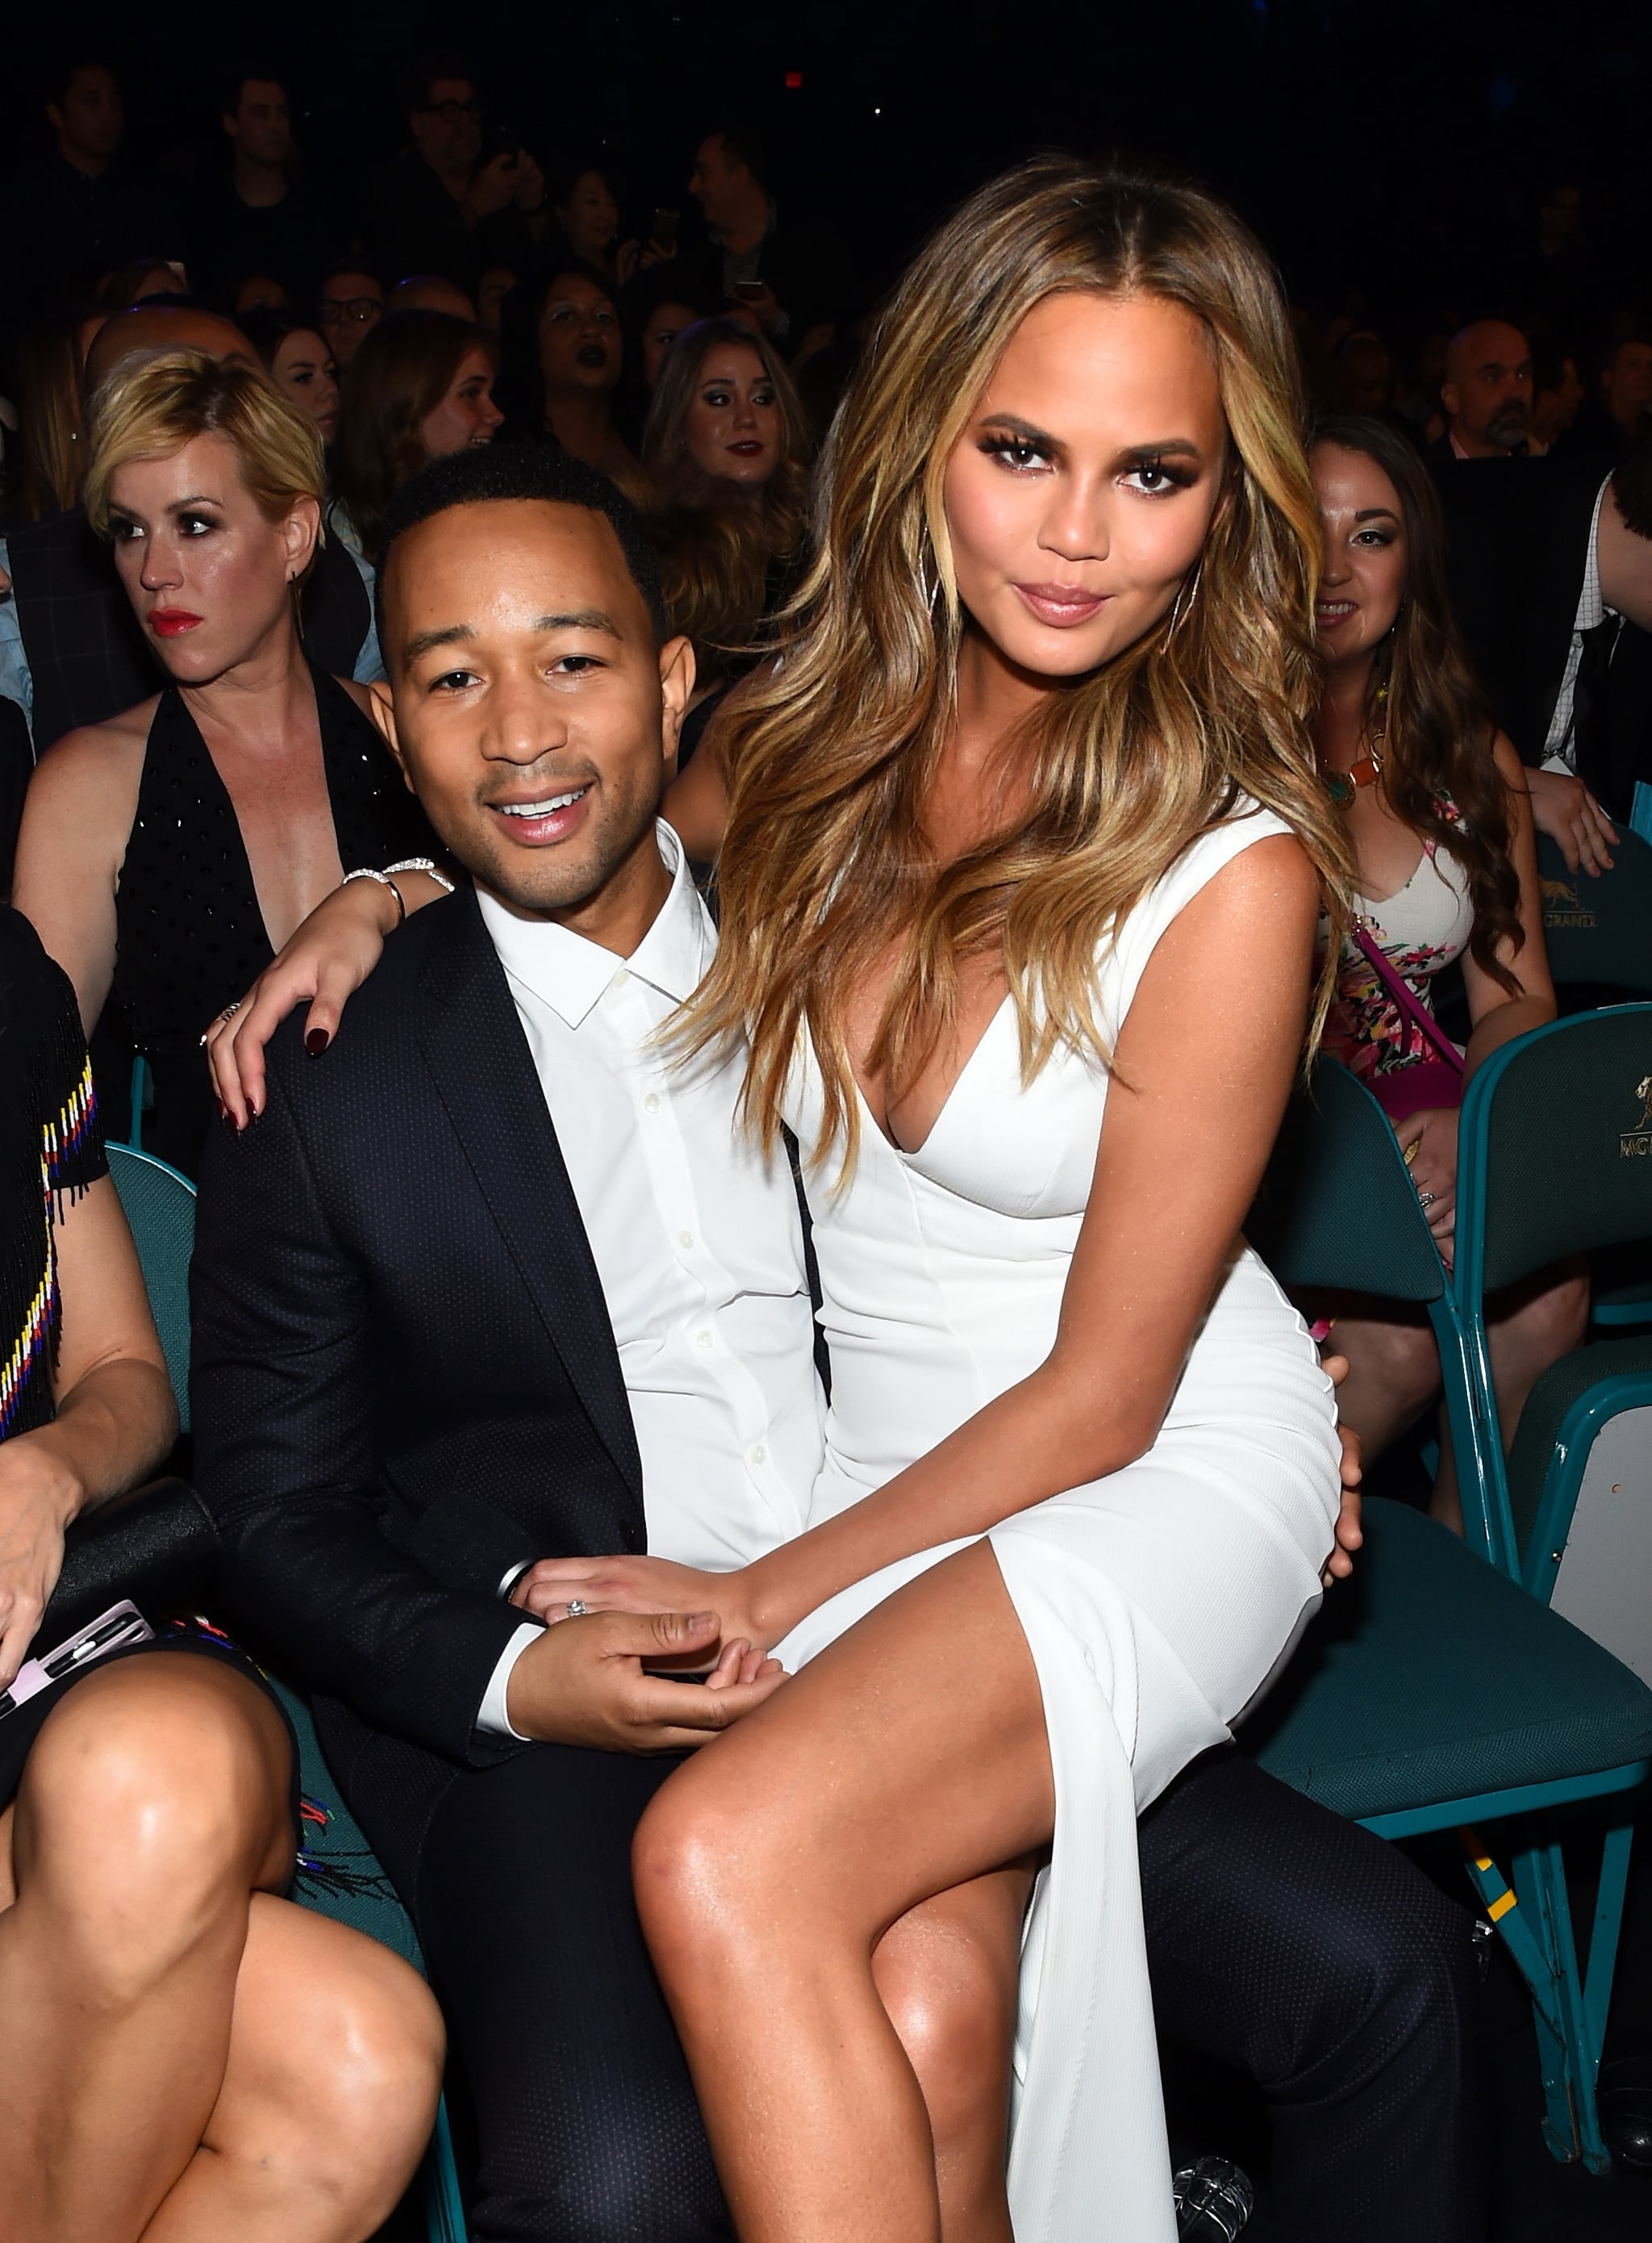 when did john legend this time come out